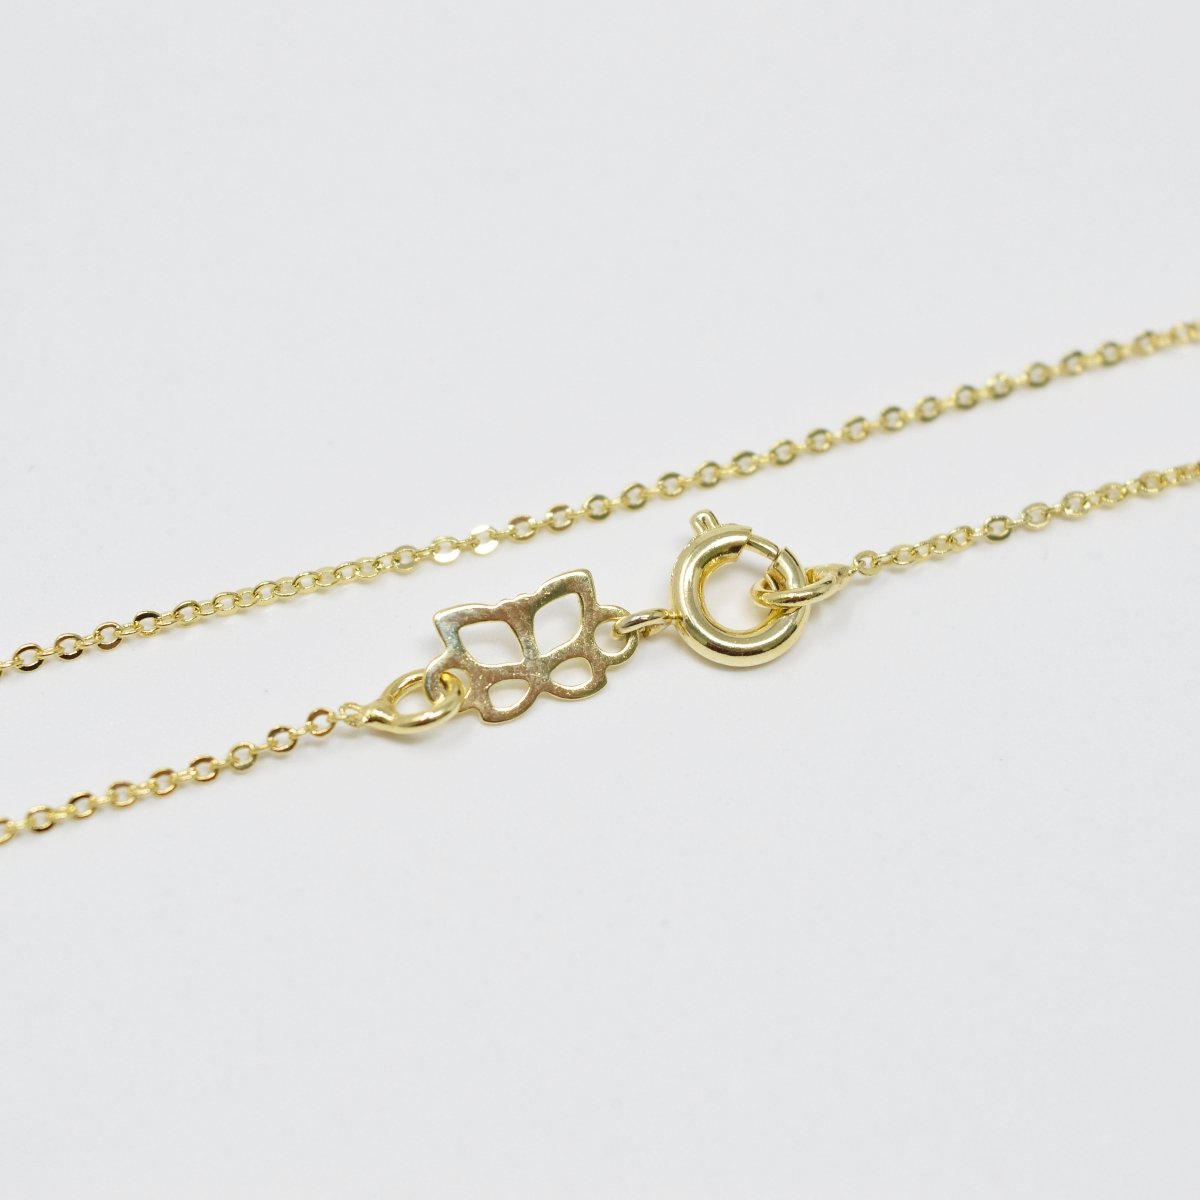 Fine Cable Chain Necklace 16 inch Chain 24K Gold Filled Necklace | WA-220 Clearance Pricing - DLUXCA